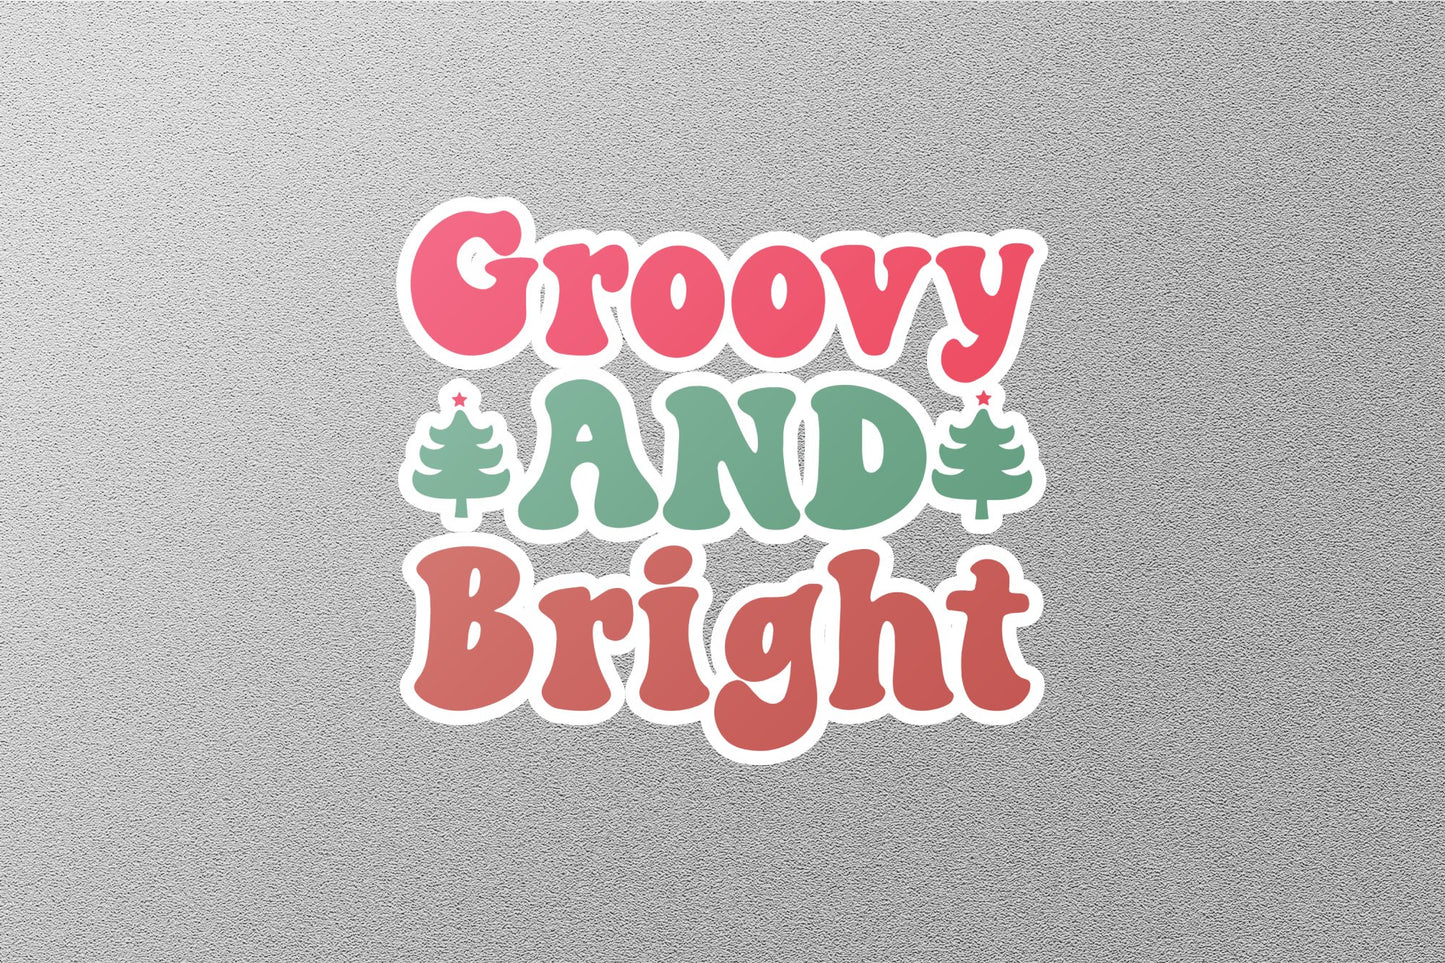 Groovy And Bright Christmas Sticker